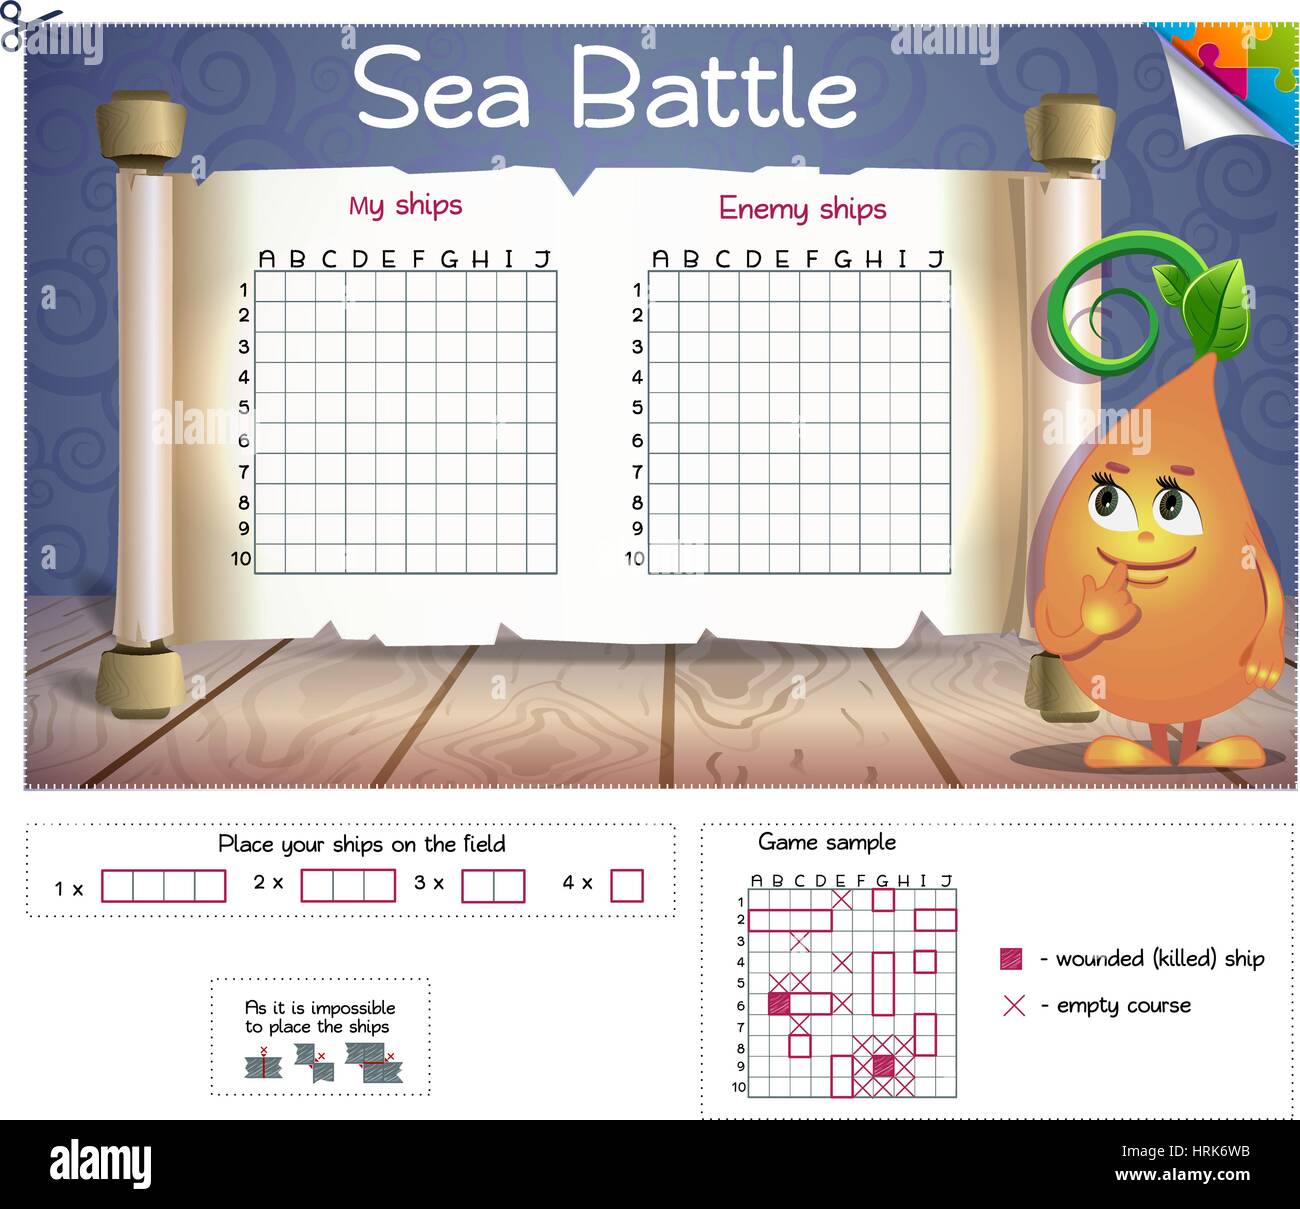 Sea Battle. Board game. Form for the game Battleship. Stock Vector